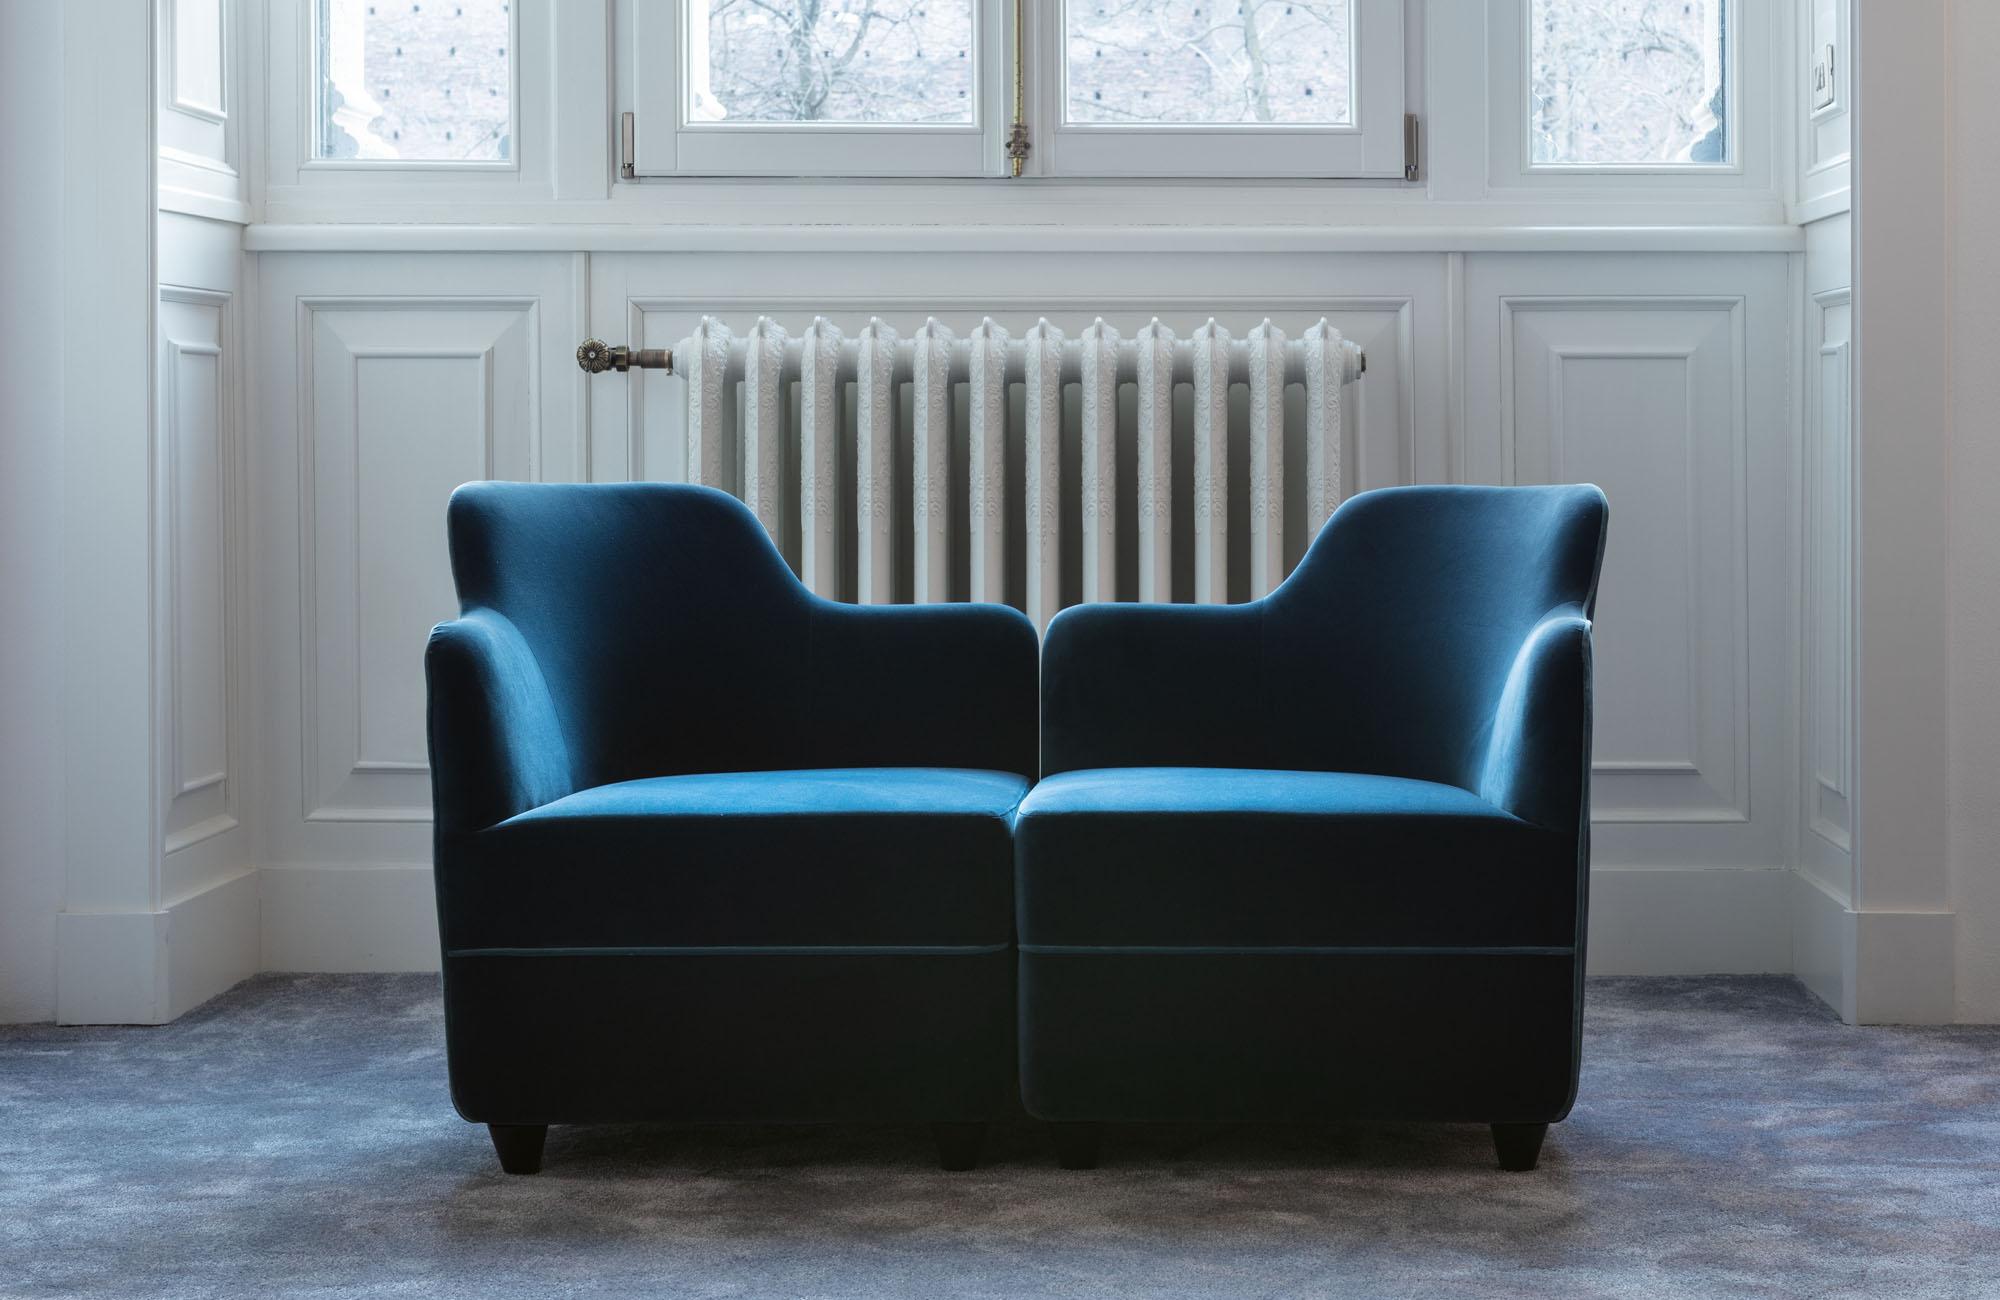 Small armchair with velvet upholstery in a wide range of colors. It can be combined with other armchairs or pouf modules to create bigger, modular combinations.
Corrado Corradi Dell'acqua in 1963 reinvented the angular shaped armchair that pampers